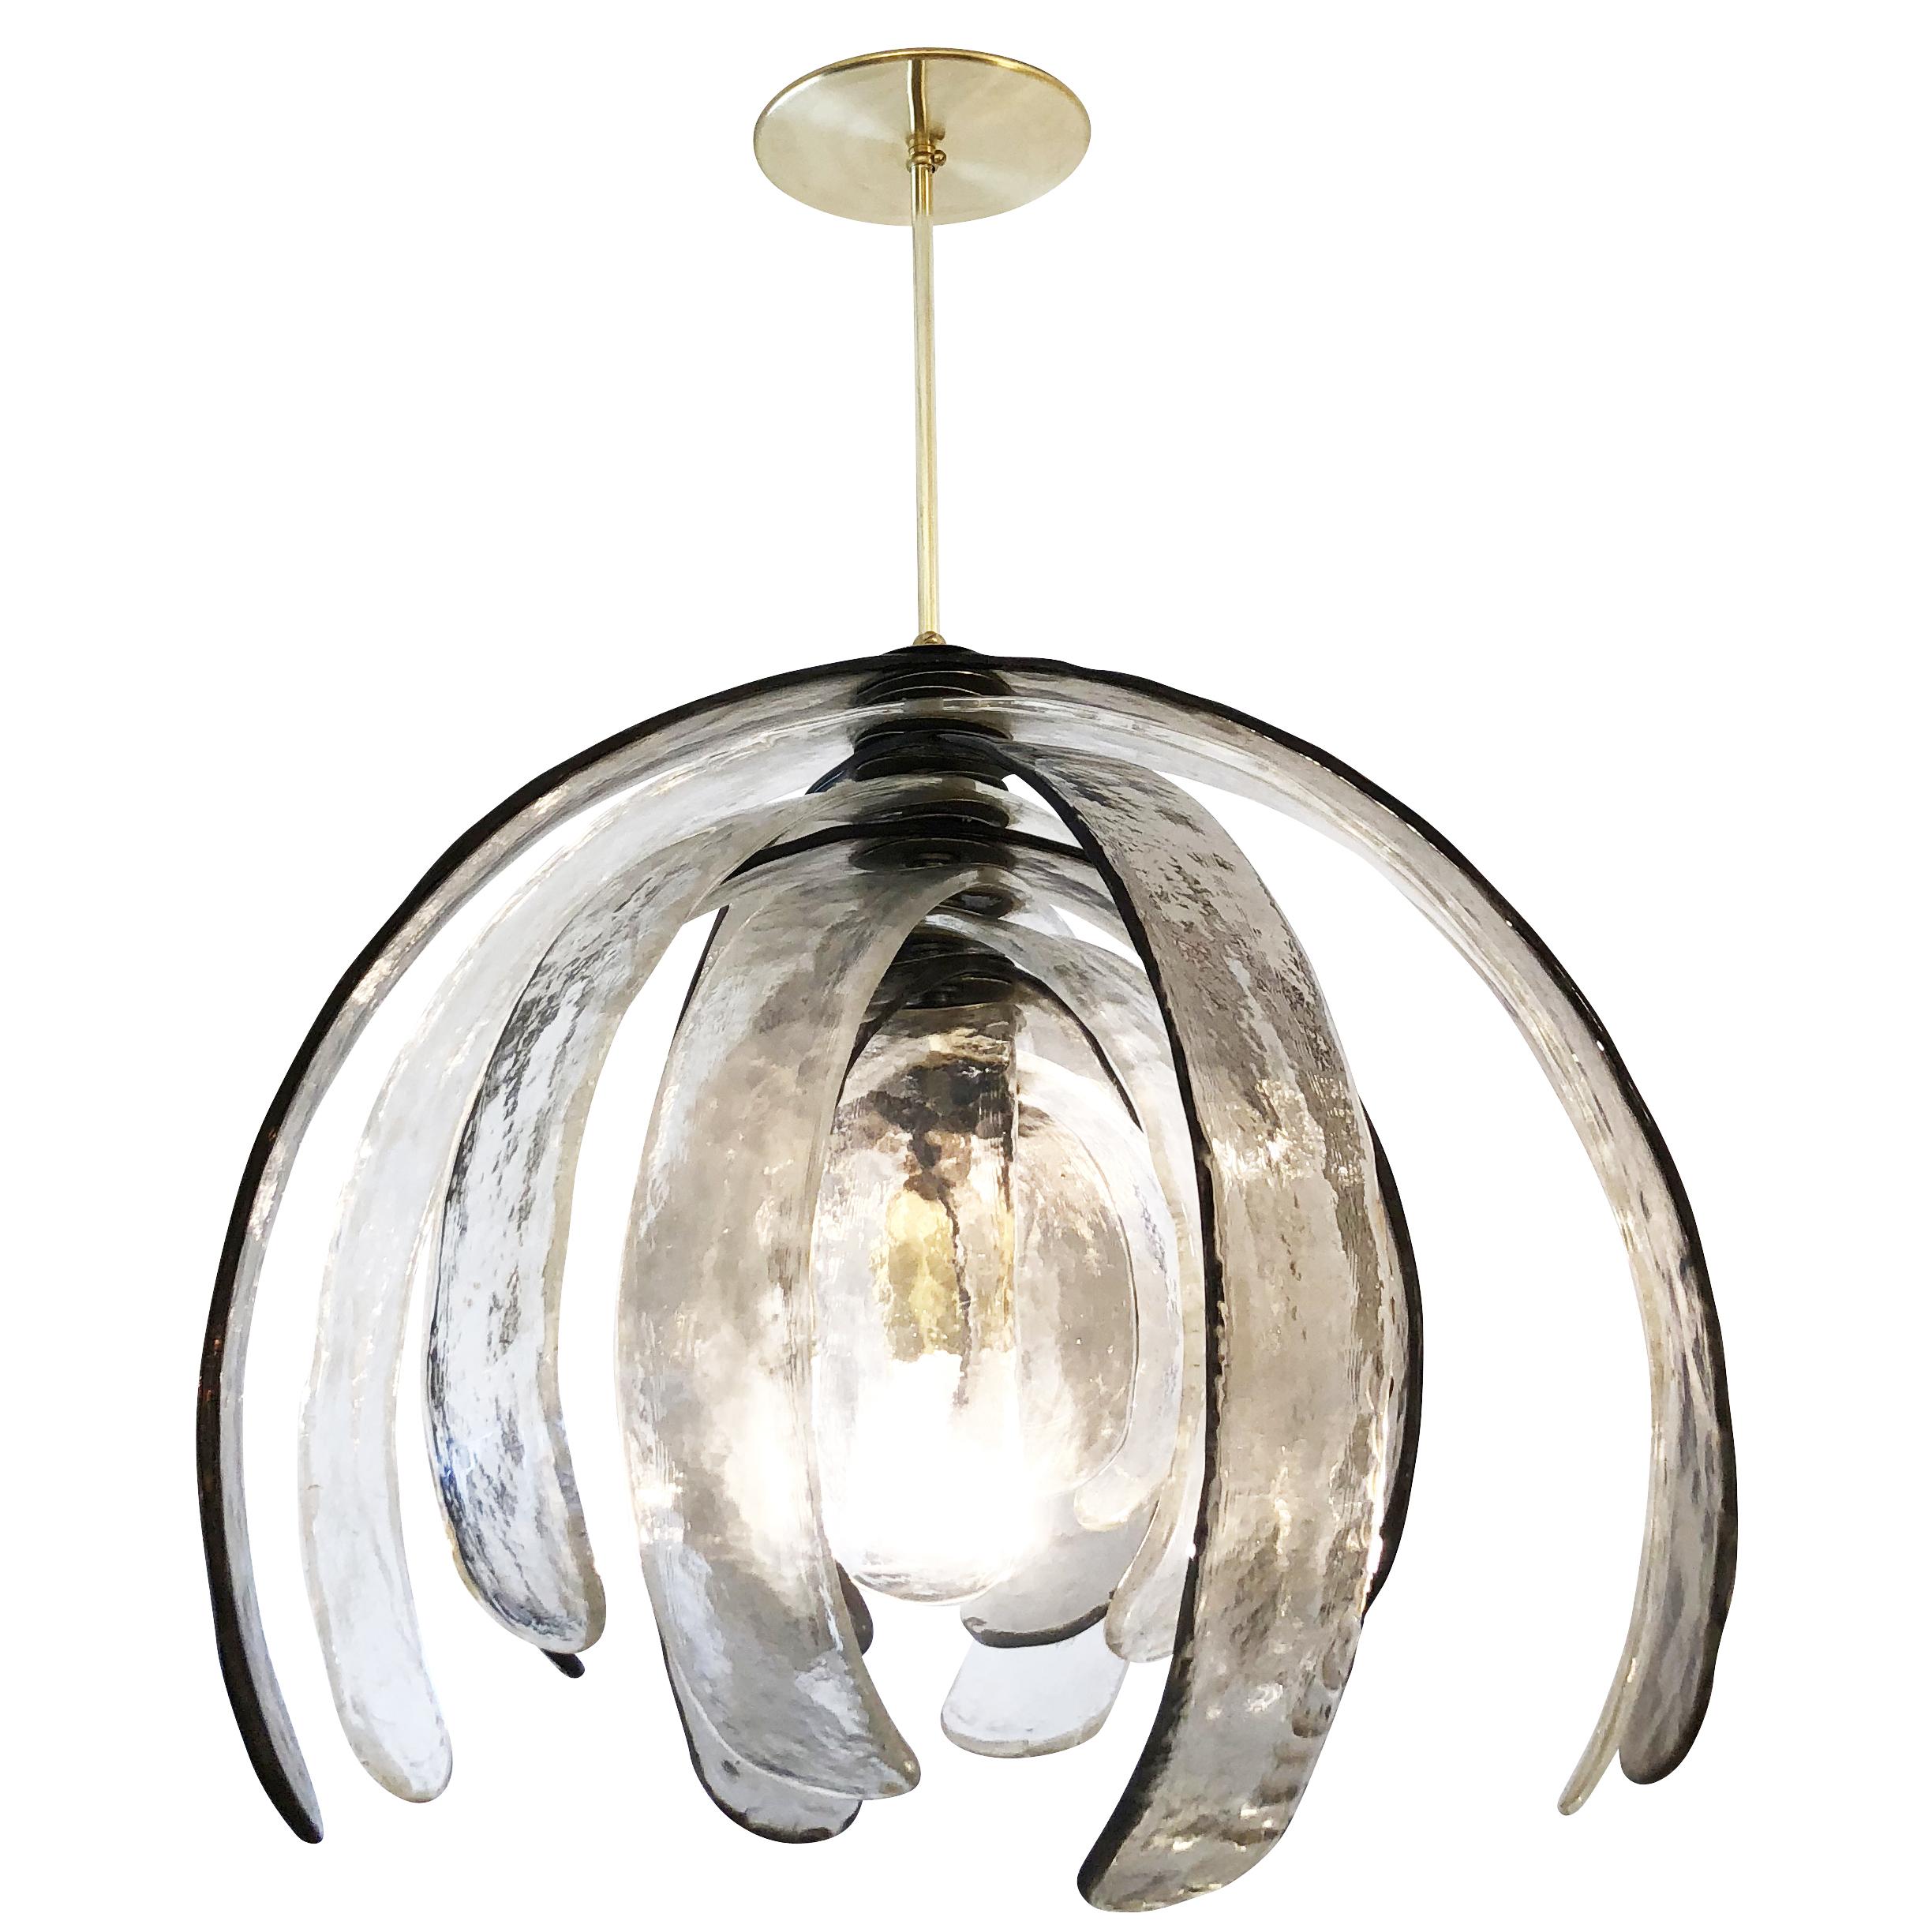 Sculptural Murano glass chandelier designed by Carlo Nason for Mazzega in the 1960s. It’s composed of several alternating clear and gray textured petal shaped glasses that can rotate around the center stem. Holds one regular socket. Stem can be